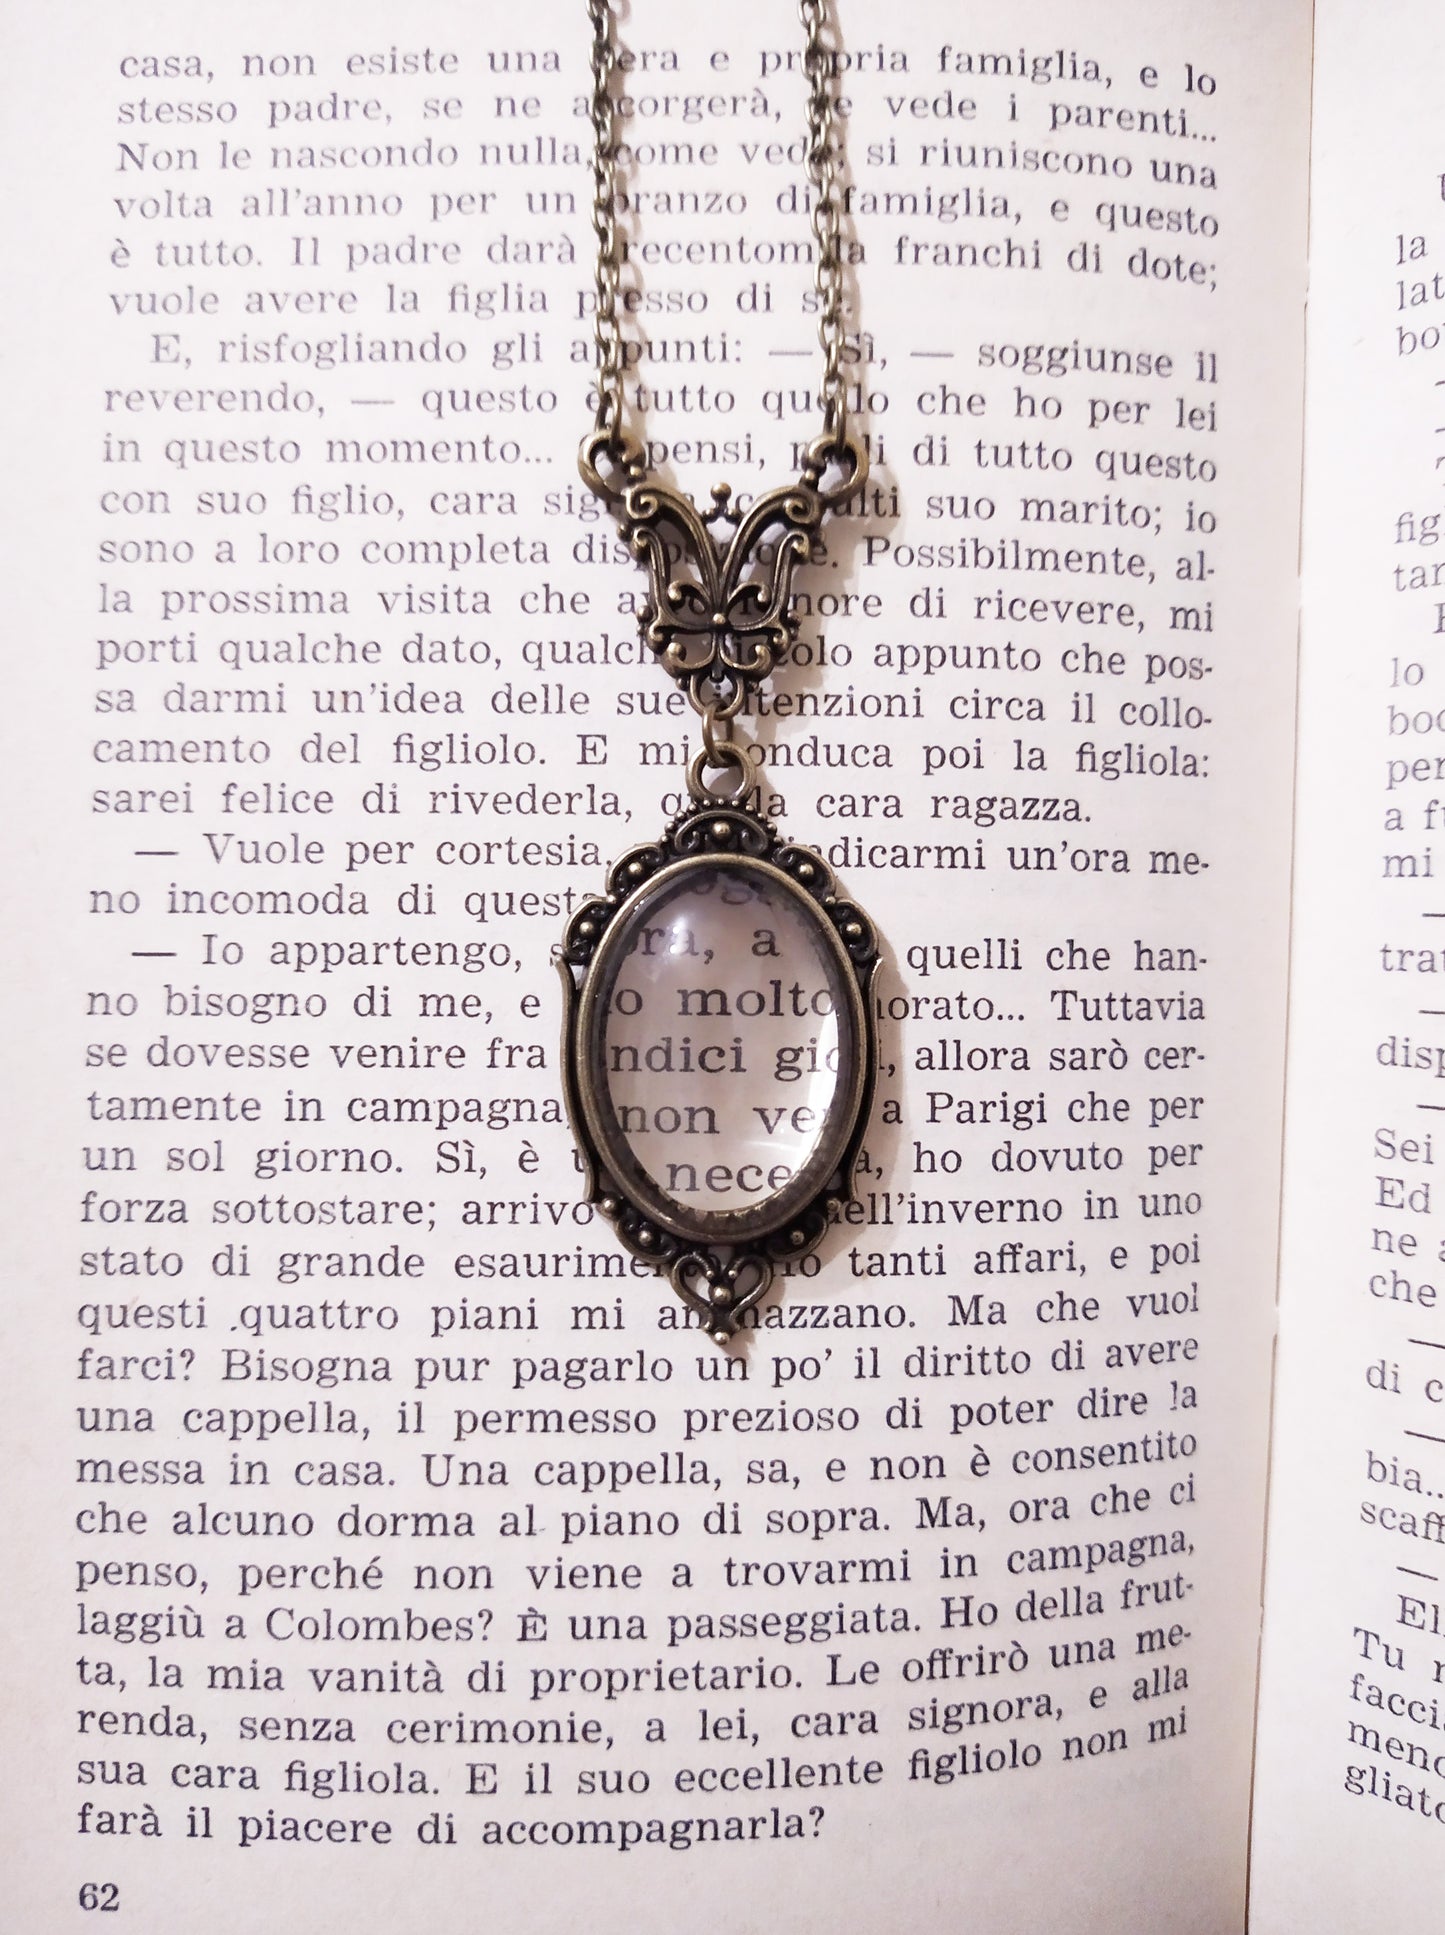 Victorian style necklace with magnifying glass